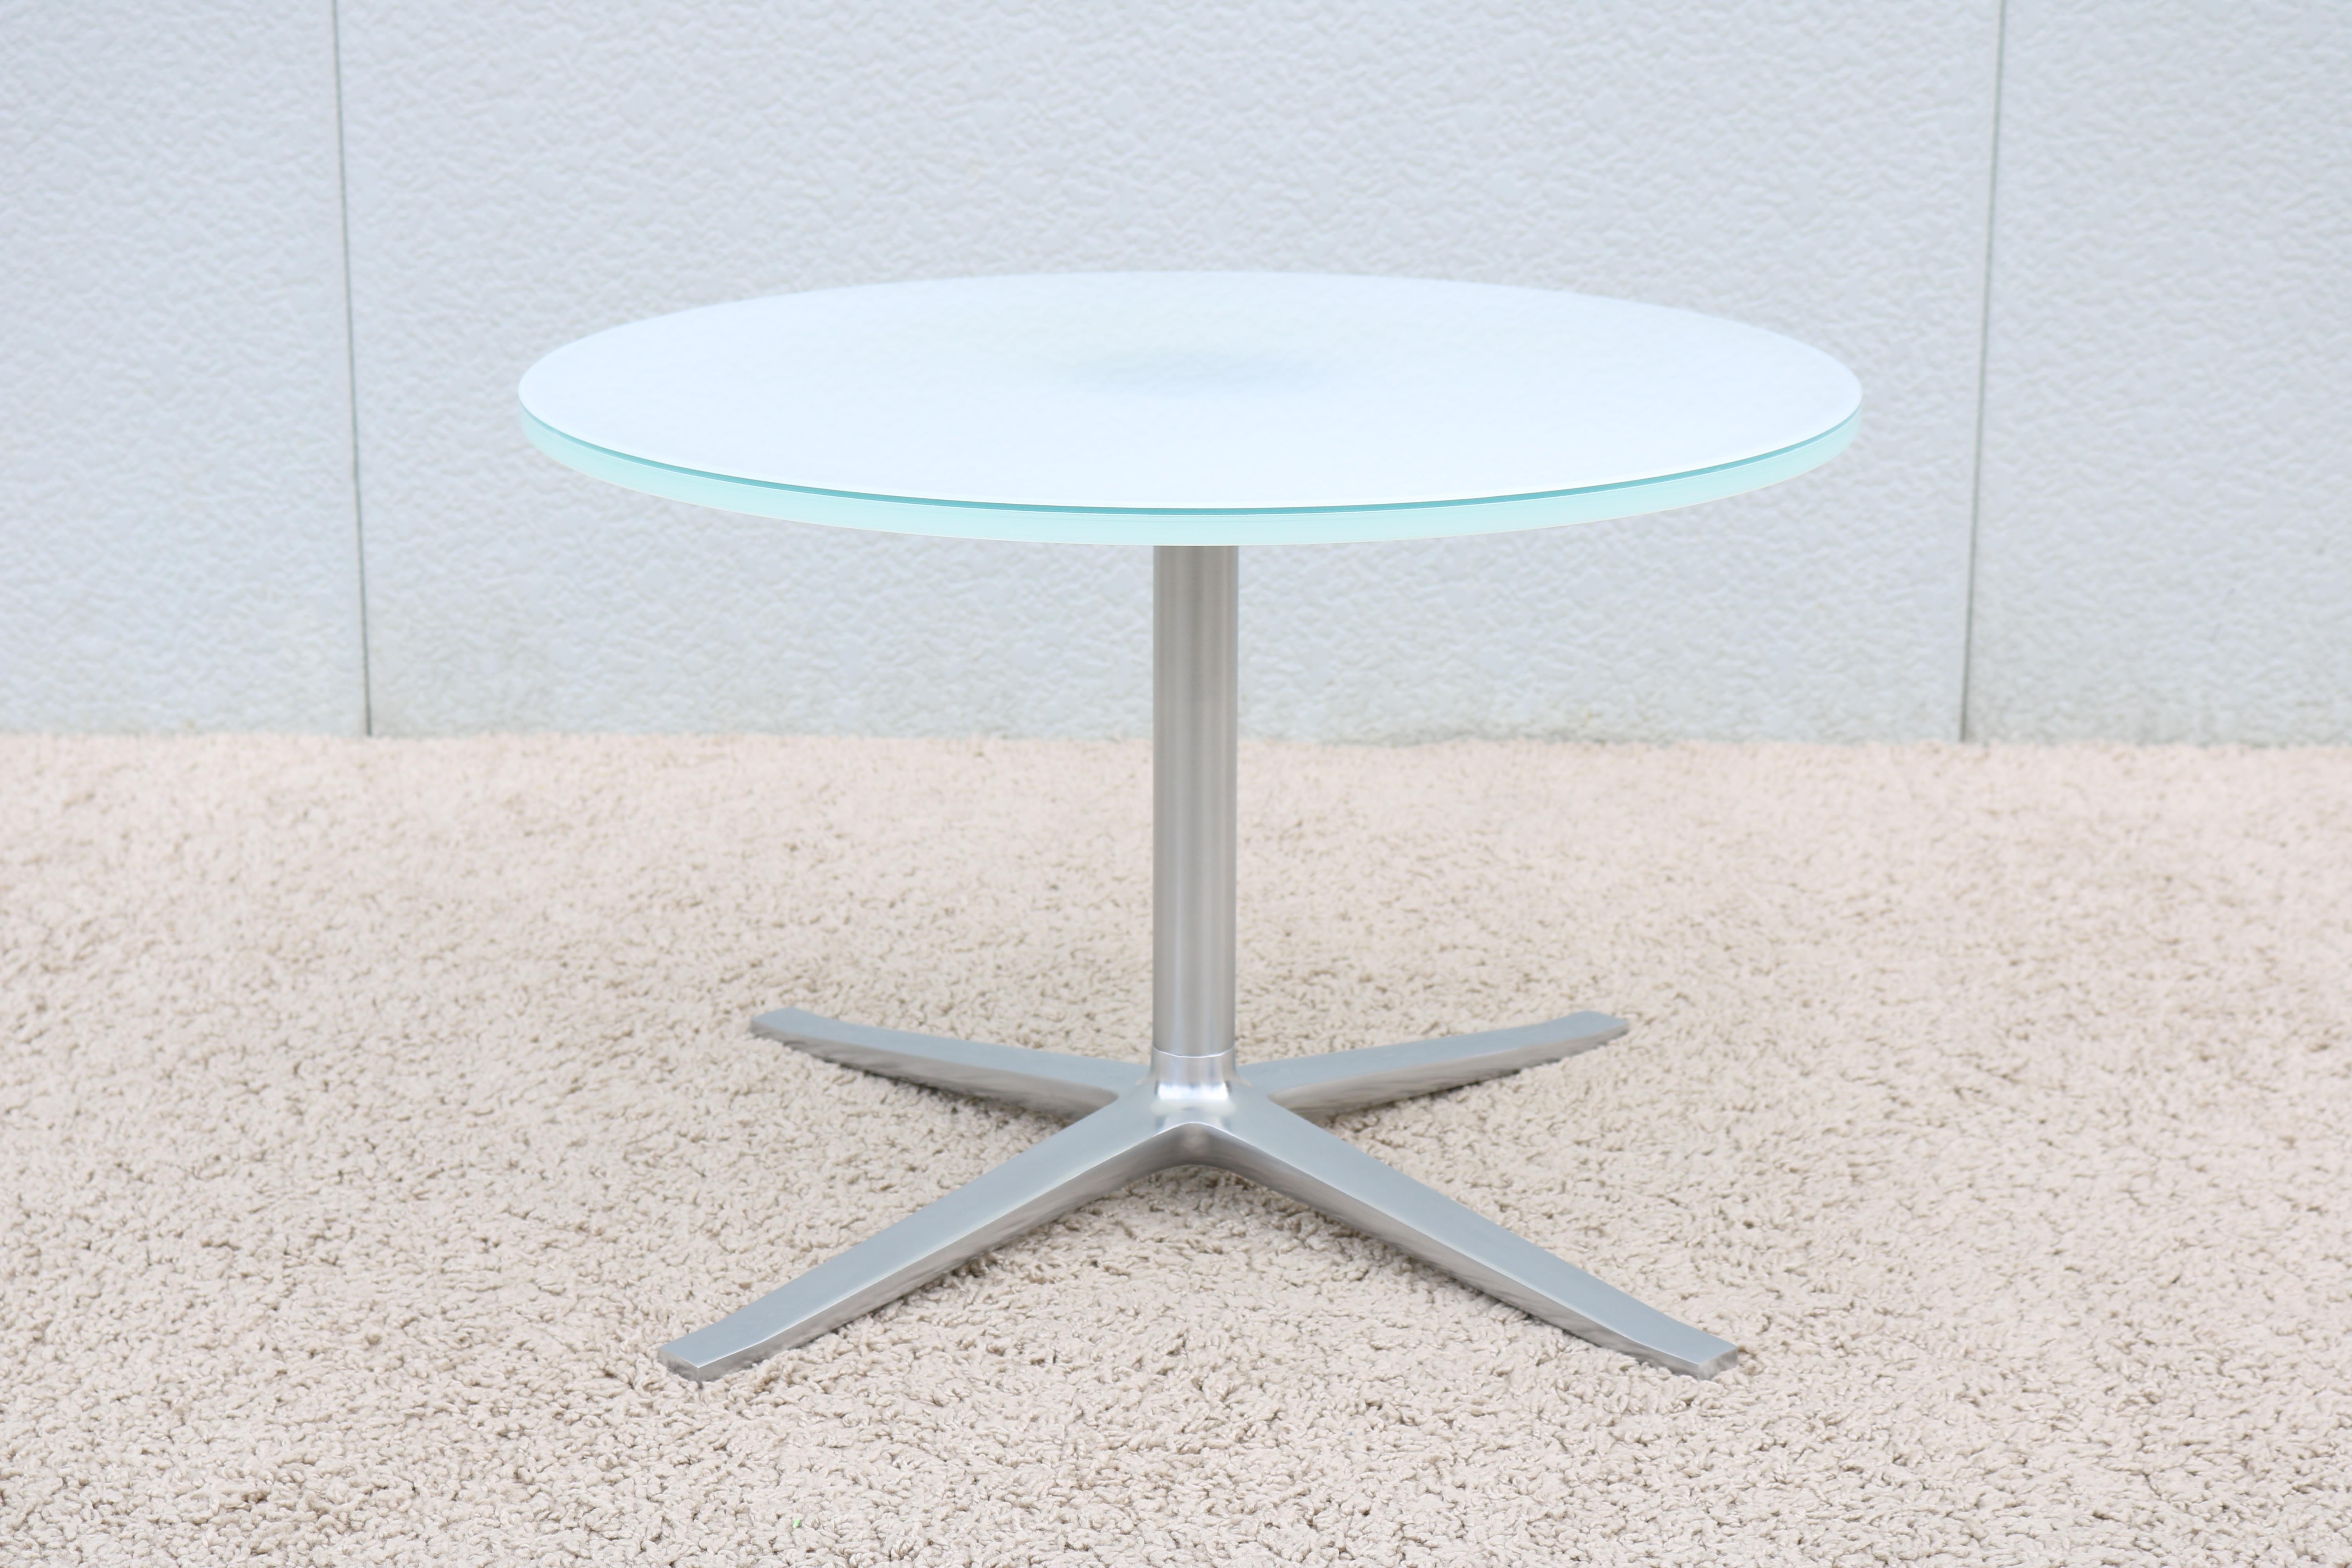 The Modern beauty and elegant design of the Bob occasional Table fits seamlessly into any environment and among Mid-Century classic design. 
Appropriate for home and workplace interiors, well-crafted beauty for the modern home.

Please note I have 2